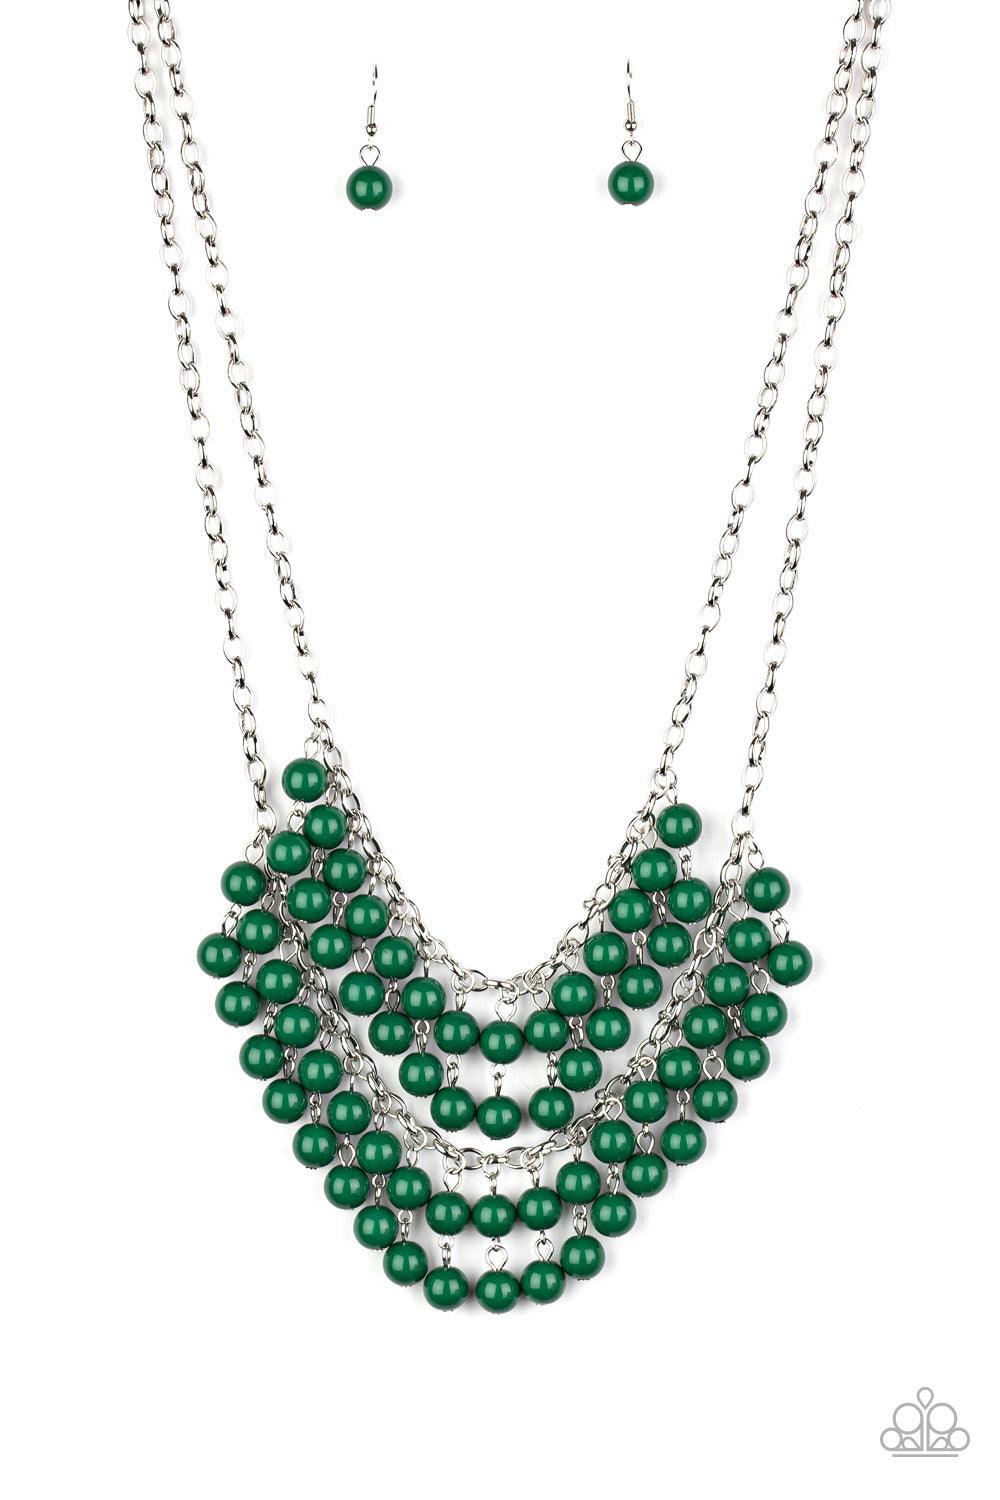 Paparazzi Accessories Bubbly Boardwalk - Green Pairs of green beads cascade from the bottoms of two silver chains, creating a vivaciously layered fringe below the collar. Features an adjustable clasp closure. Sold as one individual necklace. Includes one